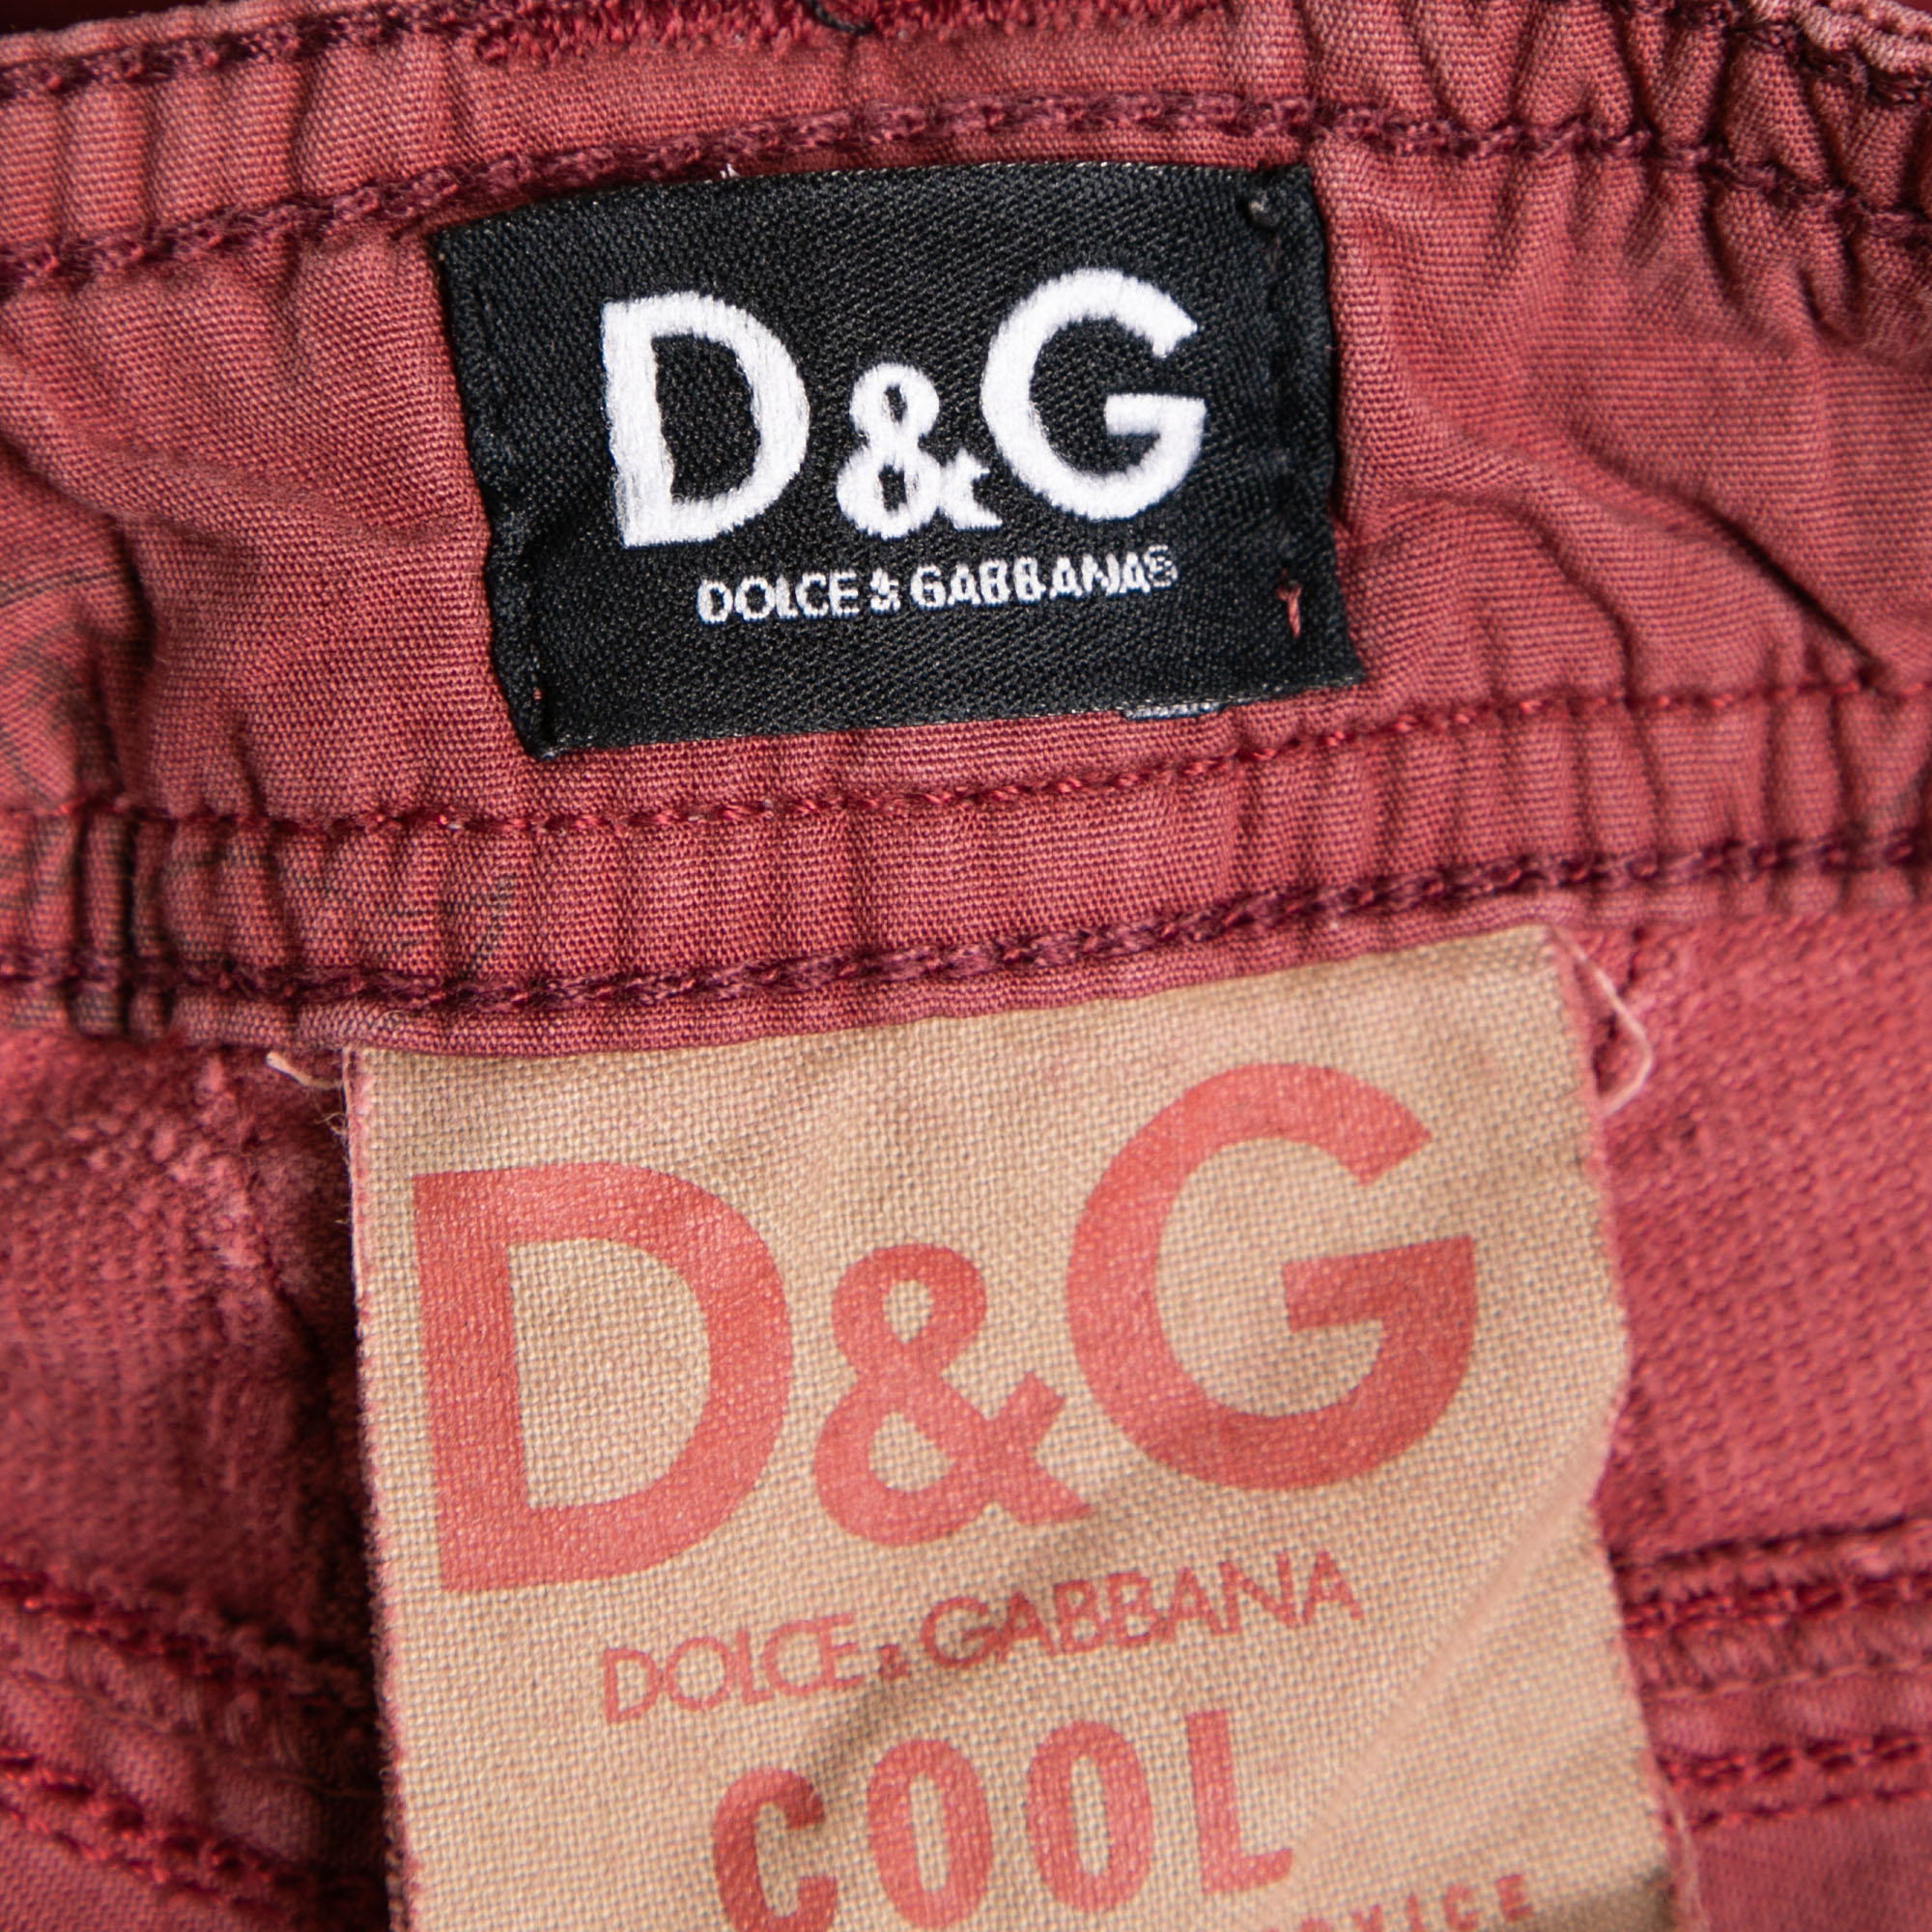 D&G Red Corduroy Low Rise Boot-Cut Tight Fit Pants S Waist 29